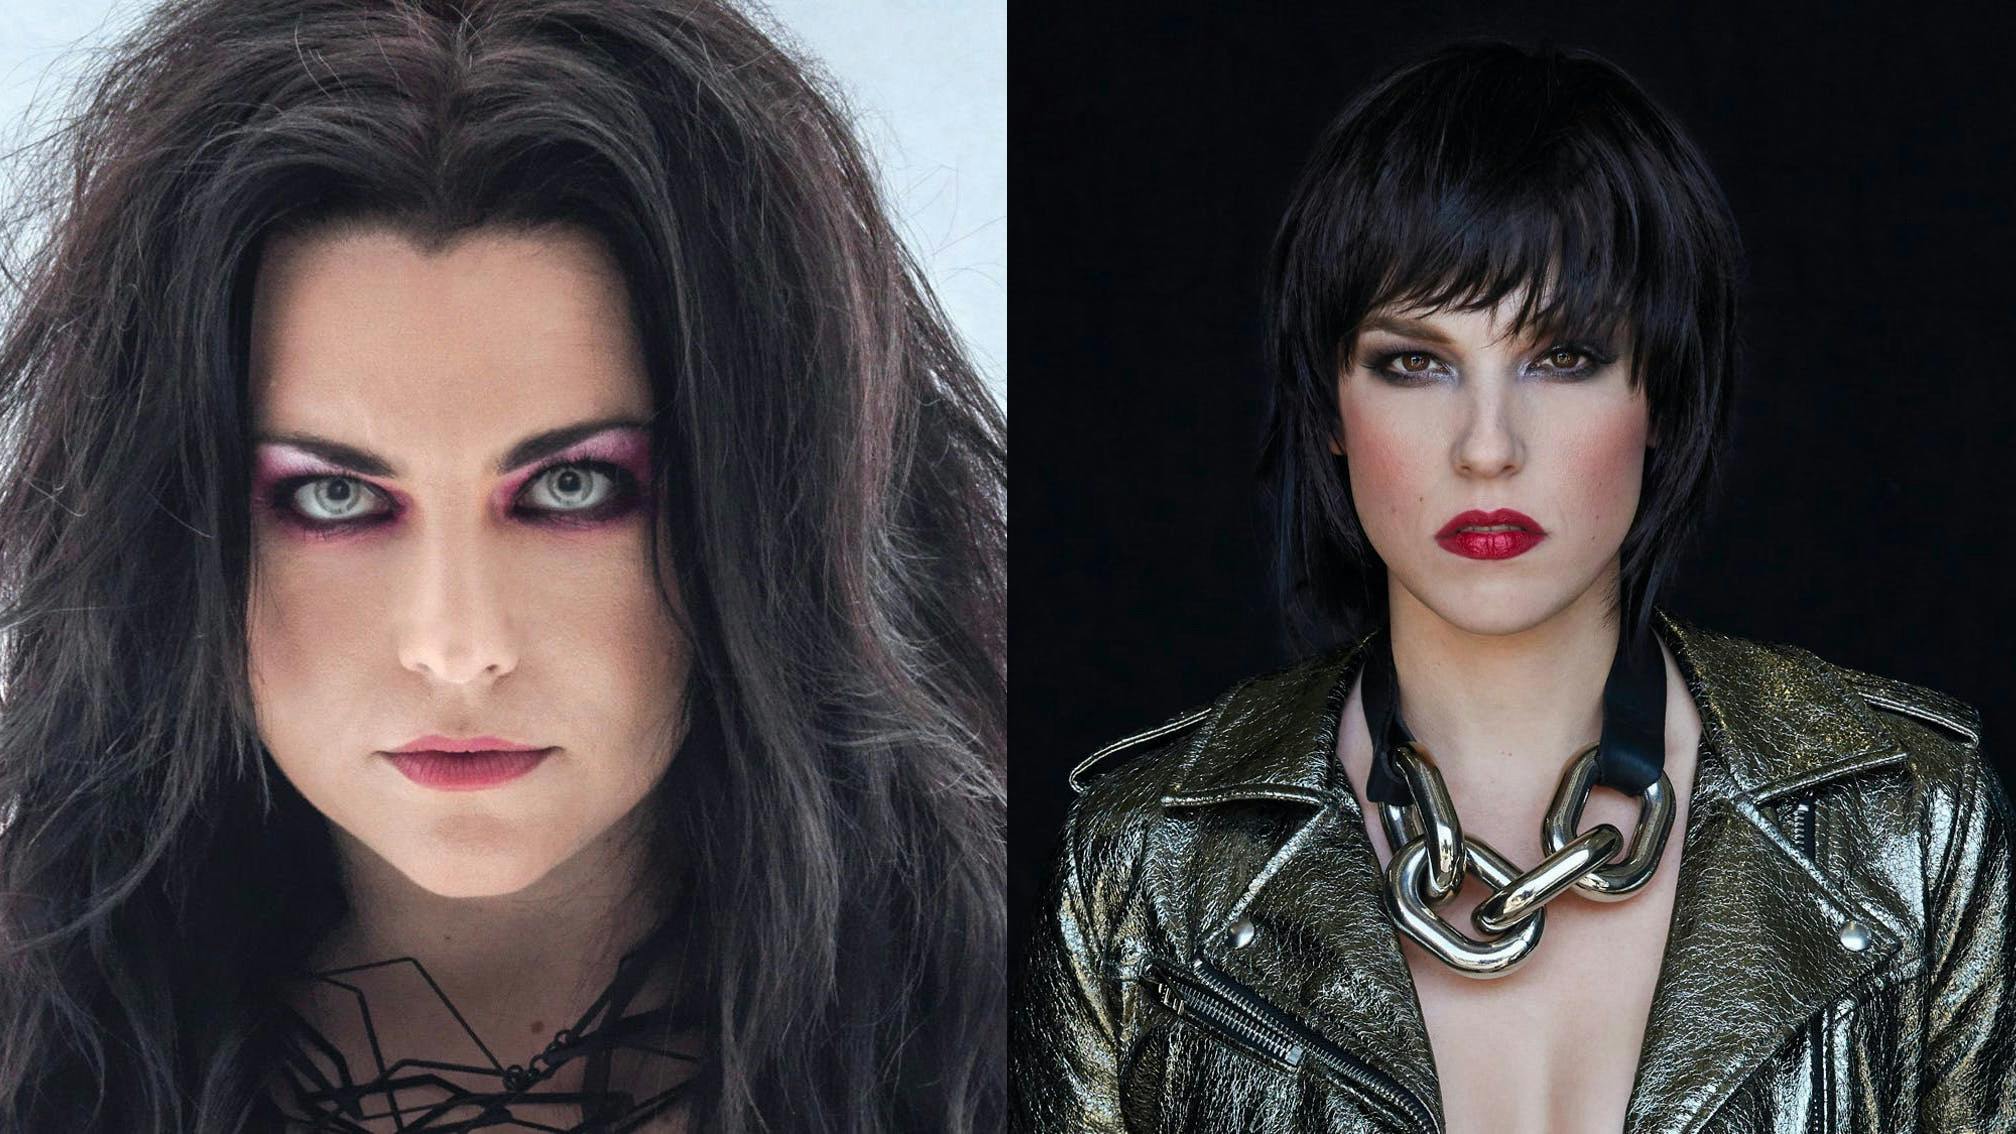 “This Is Good Versus Evil”: Lzzy Hale And Amy Lee On The Importance Of Voting